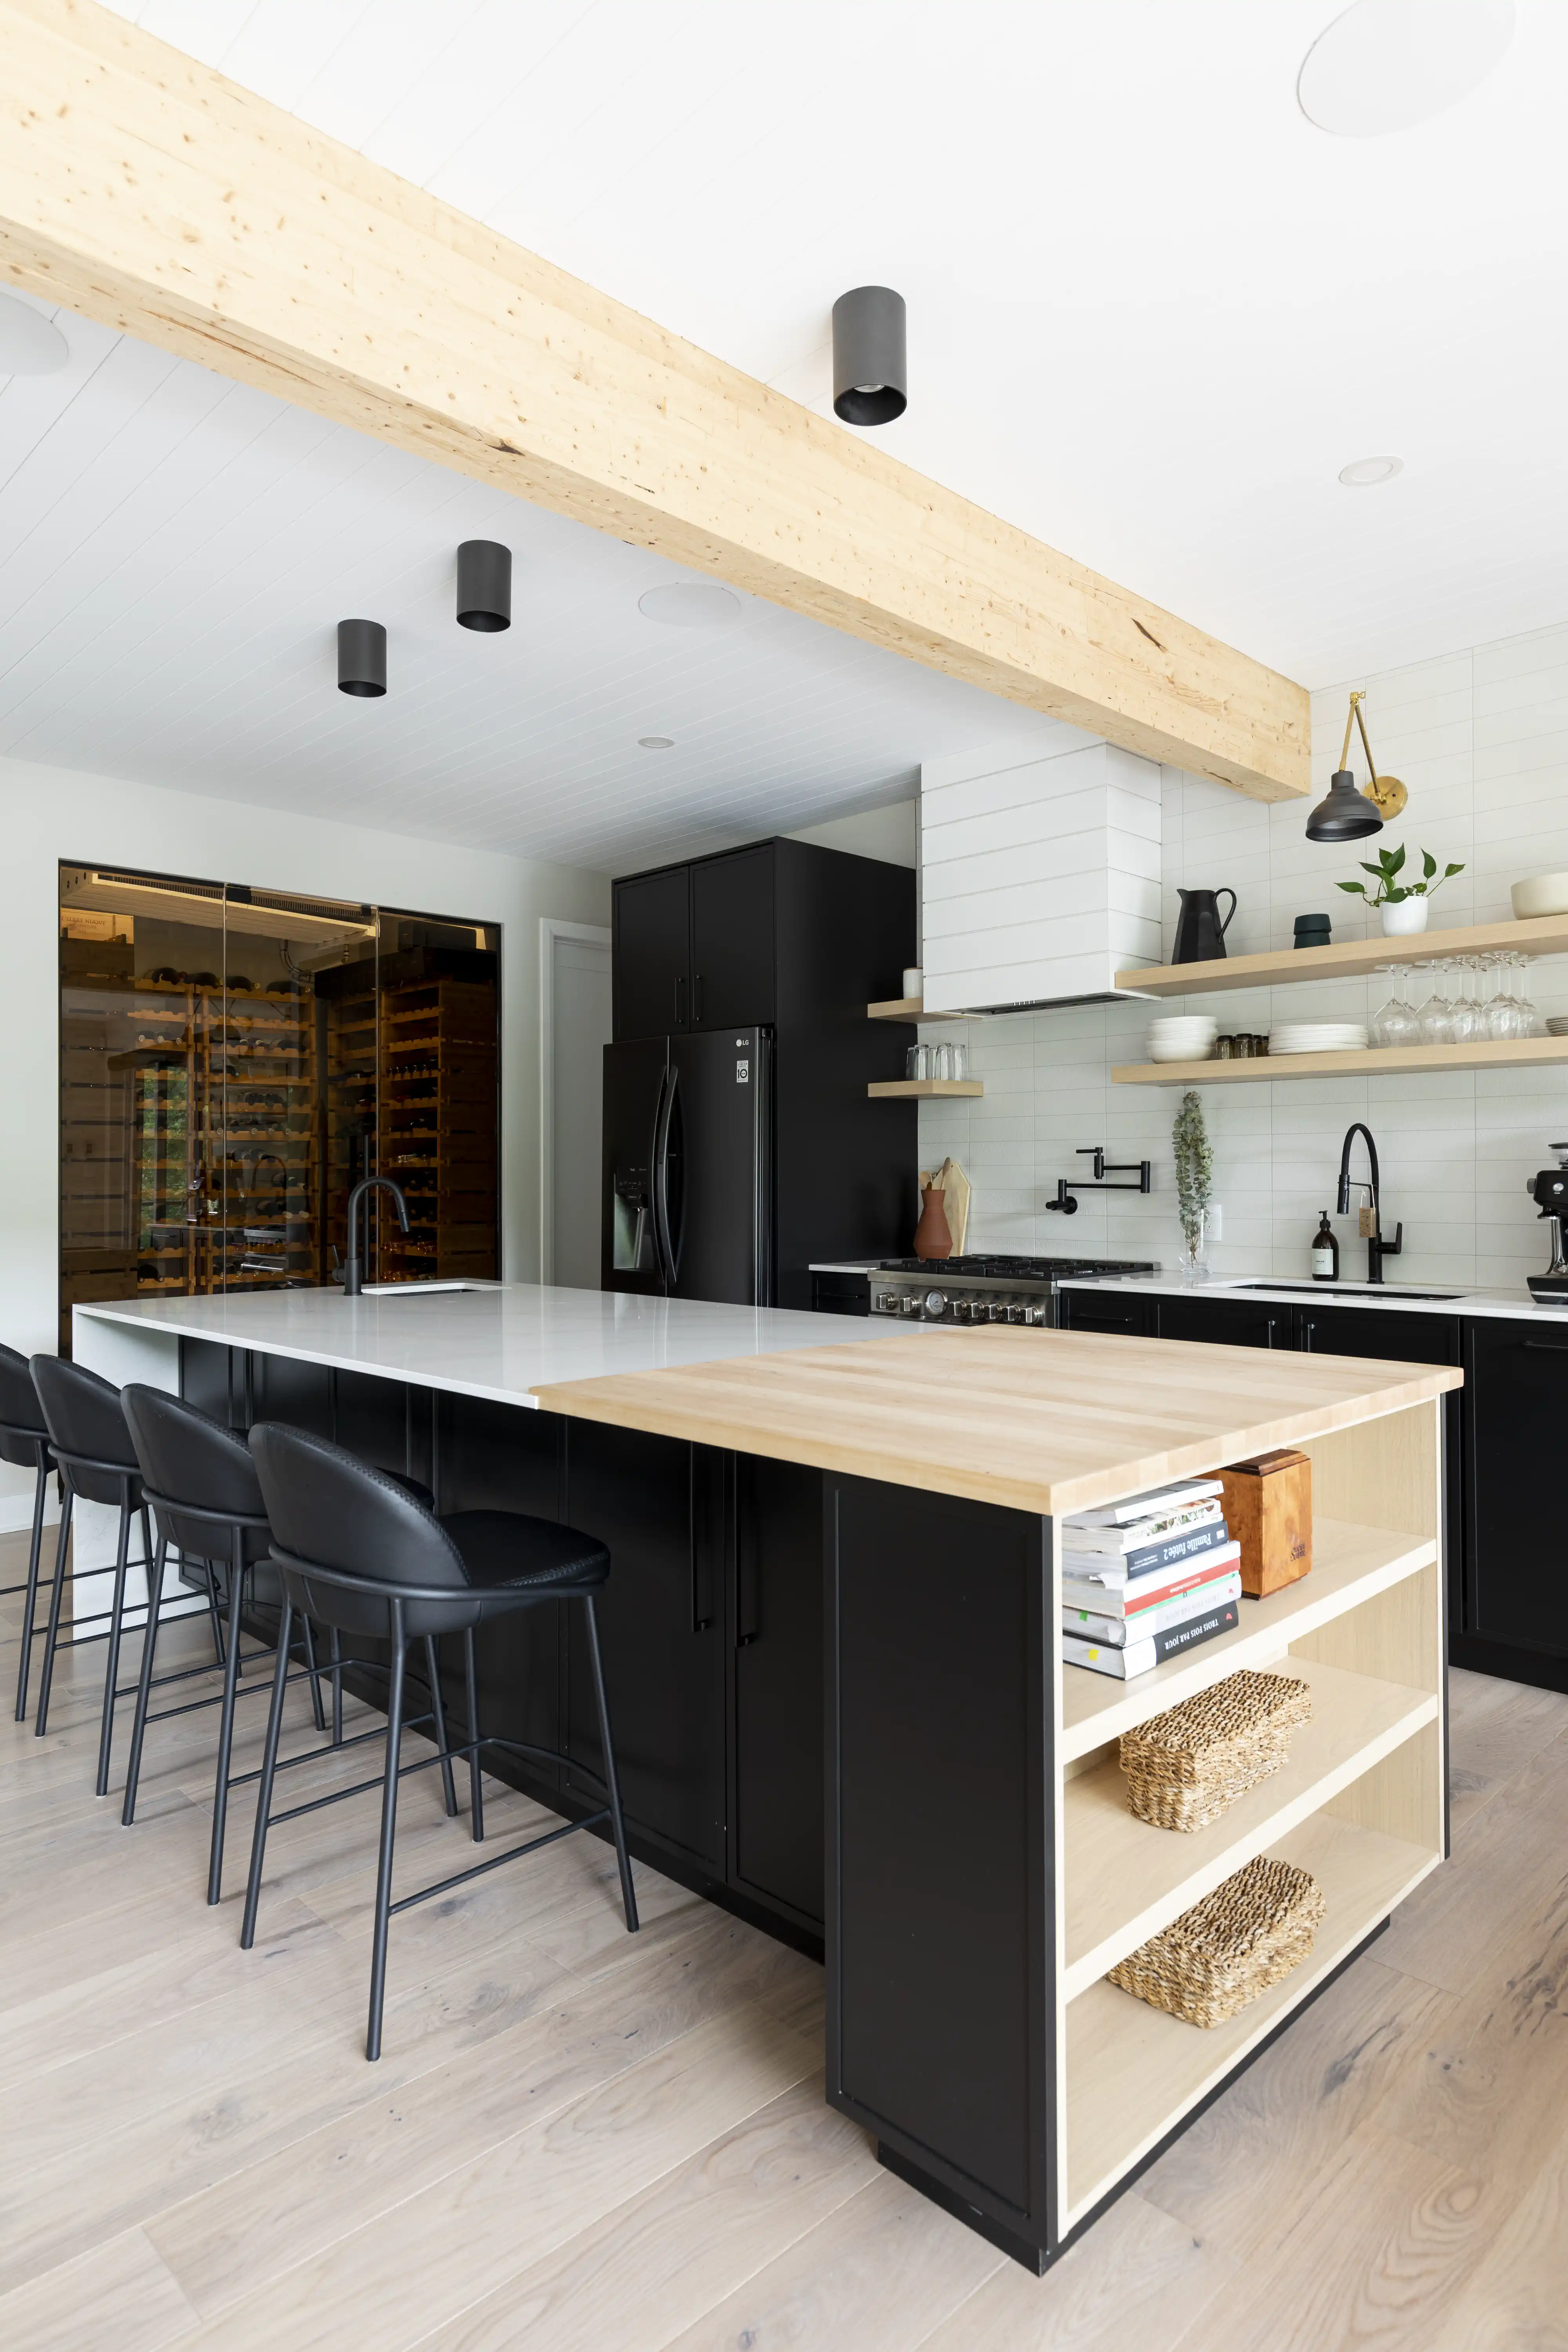 A modern kitchen with a wooden island and black appliances, interior by Sarah Brown Design